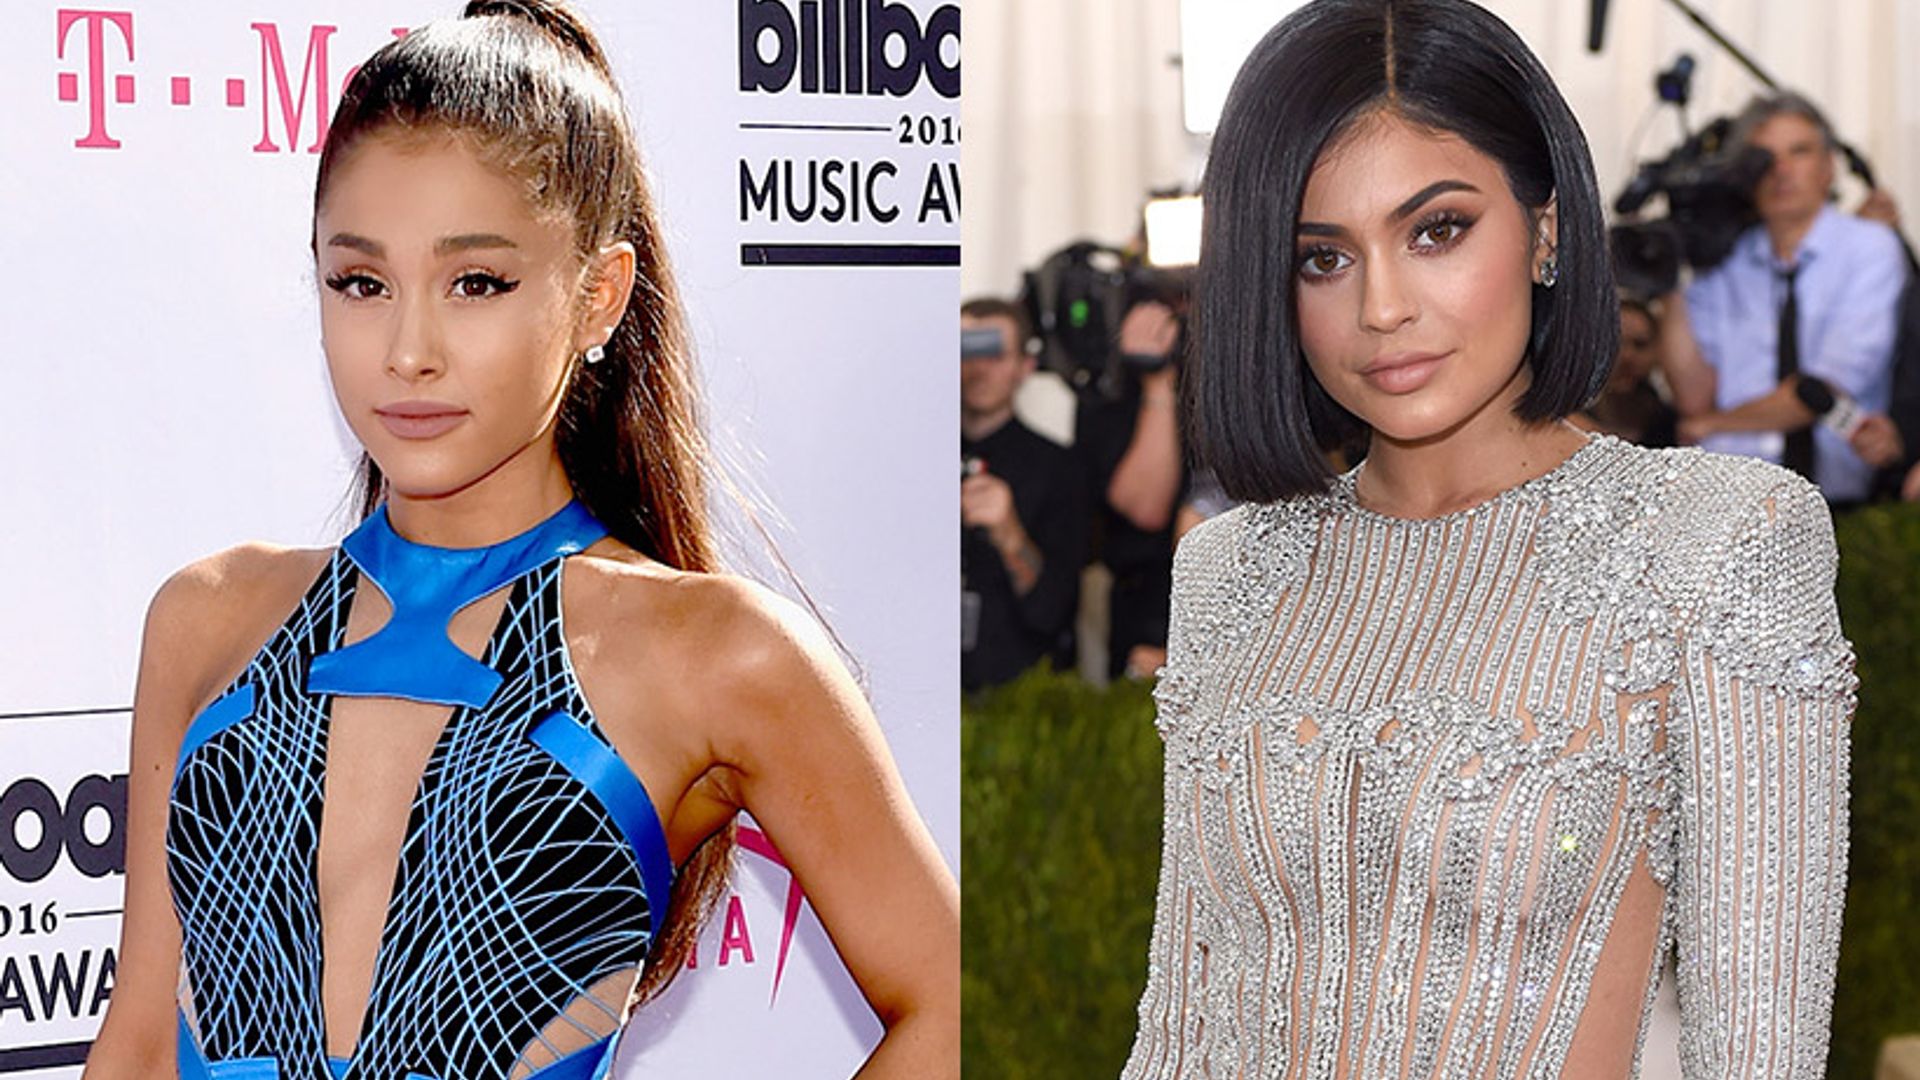 Check out Kylie Jenner's incredible birthday gift for Ariana Grande